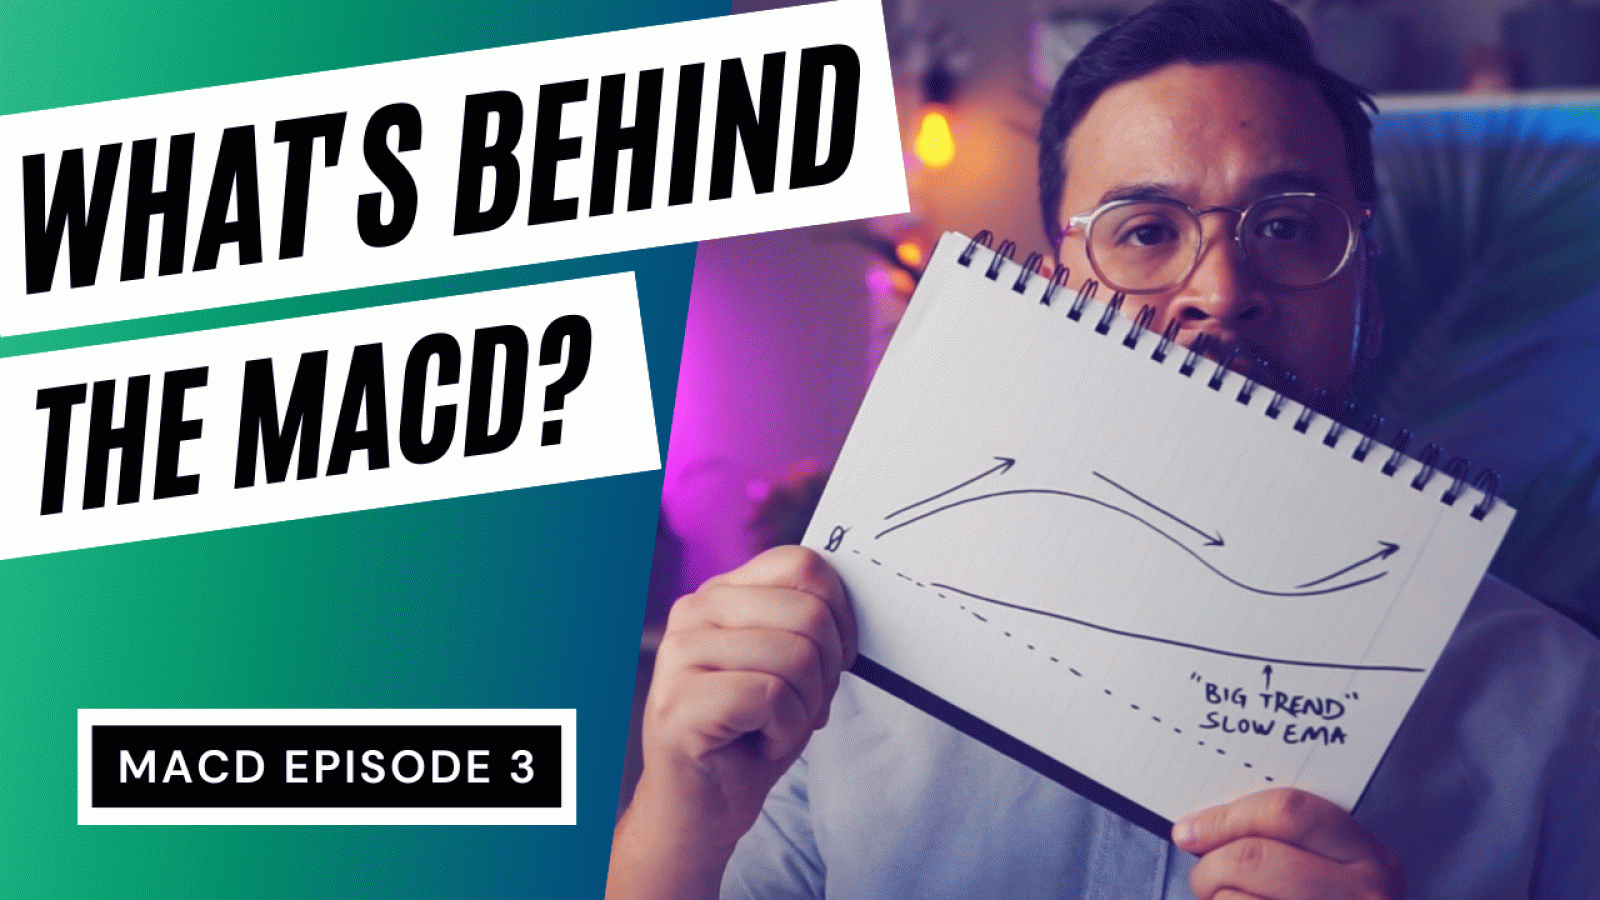 MACD Episode 3 What is Behind the MACD?